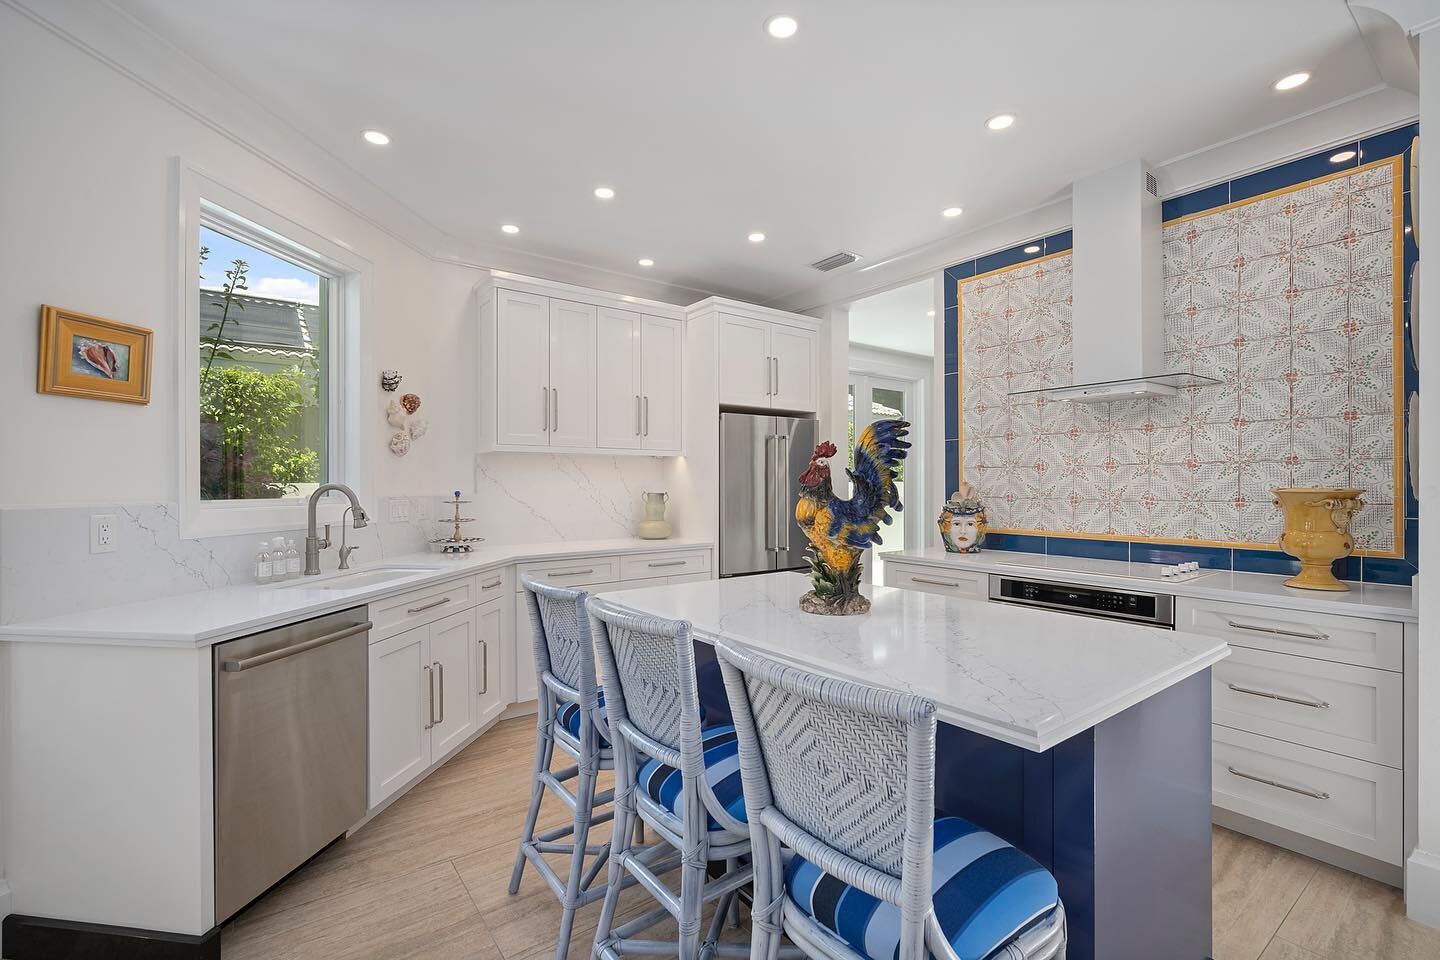 This custom made kitchen is everything 😍 over $1m went into renovating this home. How about that 🥶